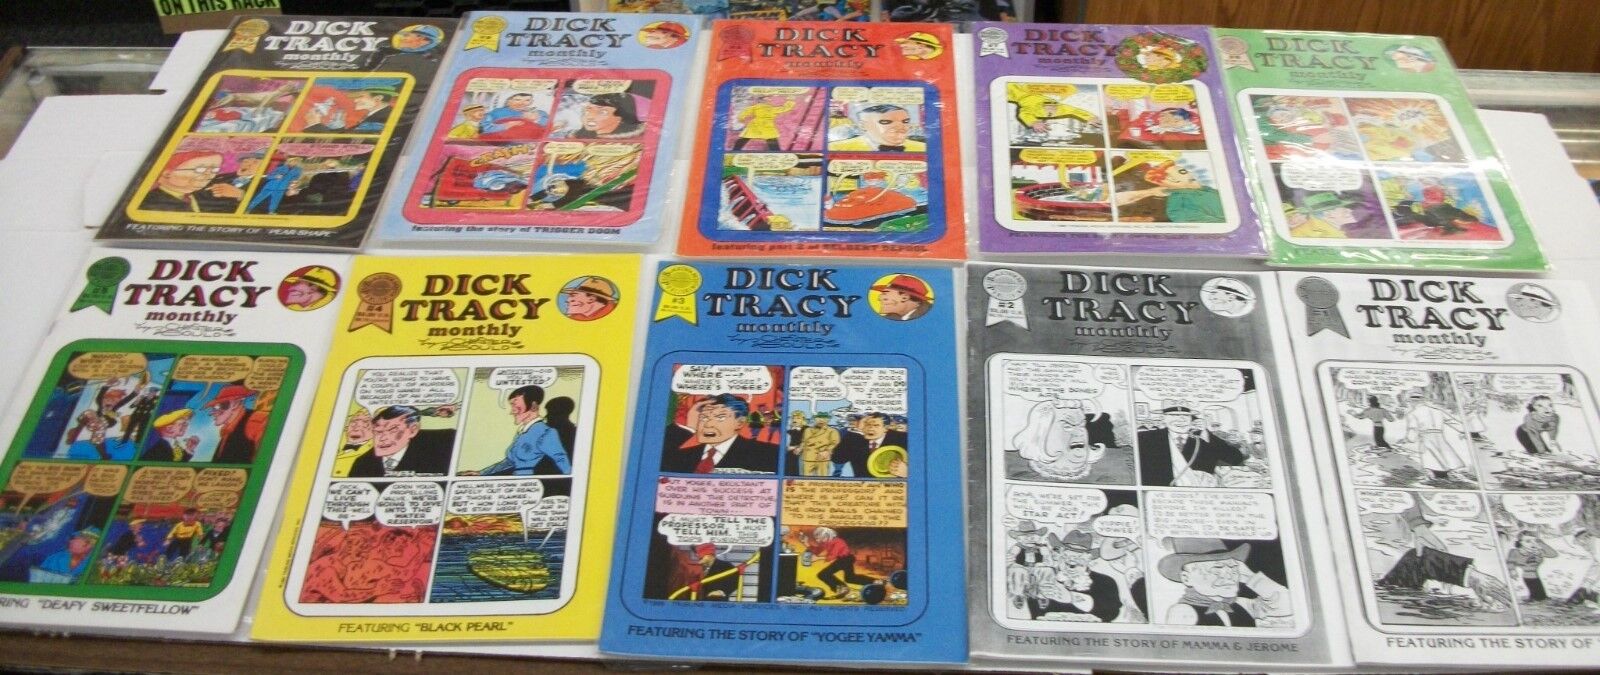 DICK TRACY MONTHLY #1-99 COMPLETE FULL RUN - CHESTER GOULD REPRINTS - 1986-89